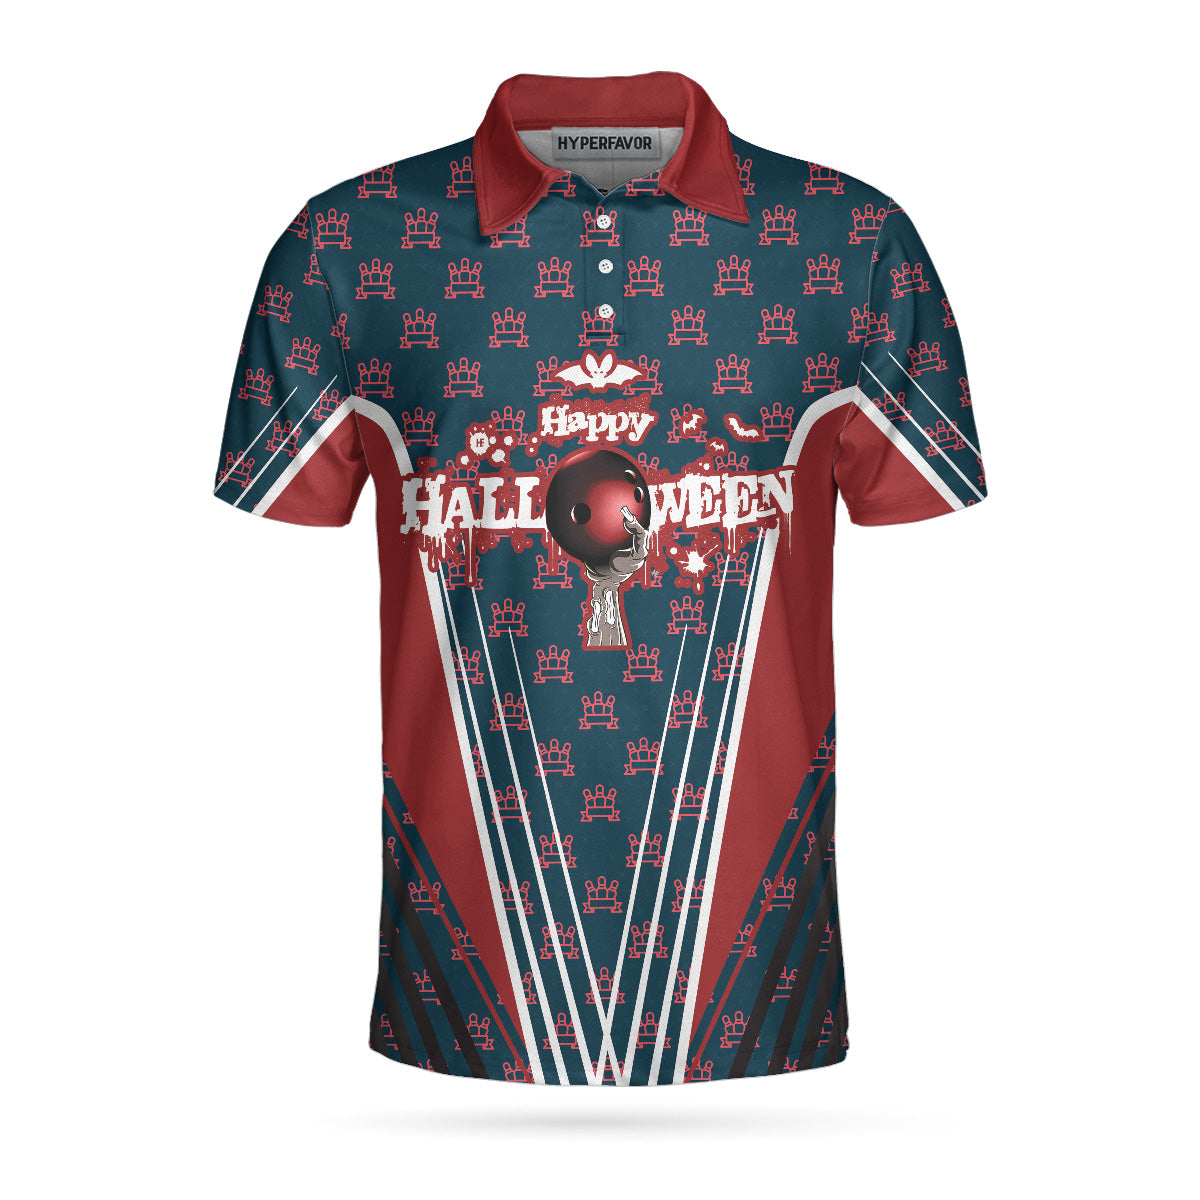 Happy Halloween And Happy Bowling Polo Shirt/ Short Sleeve Bowling Shirt For Men Coolspod